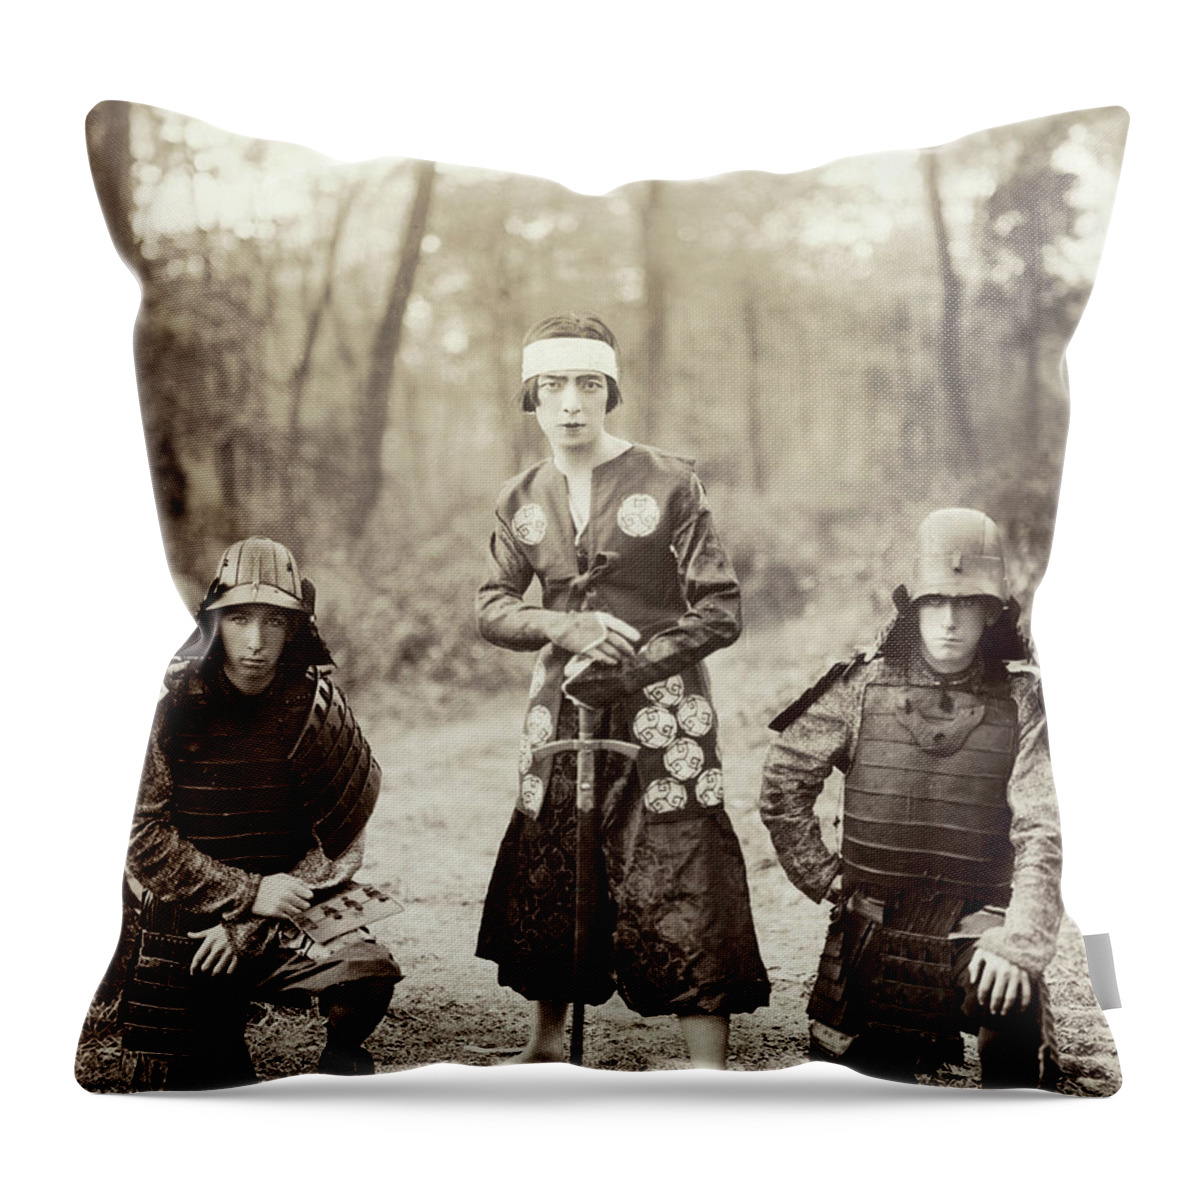 1920 Throw Pillow featuring the photograph Japan Dancer, 1920s by Granger